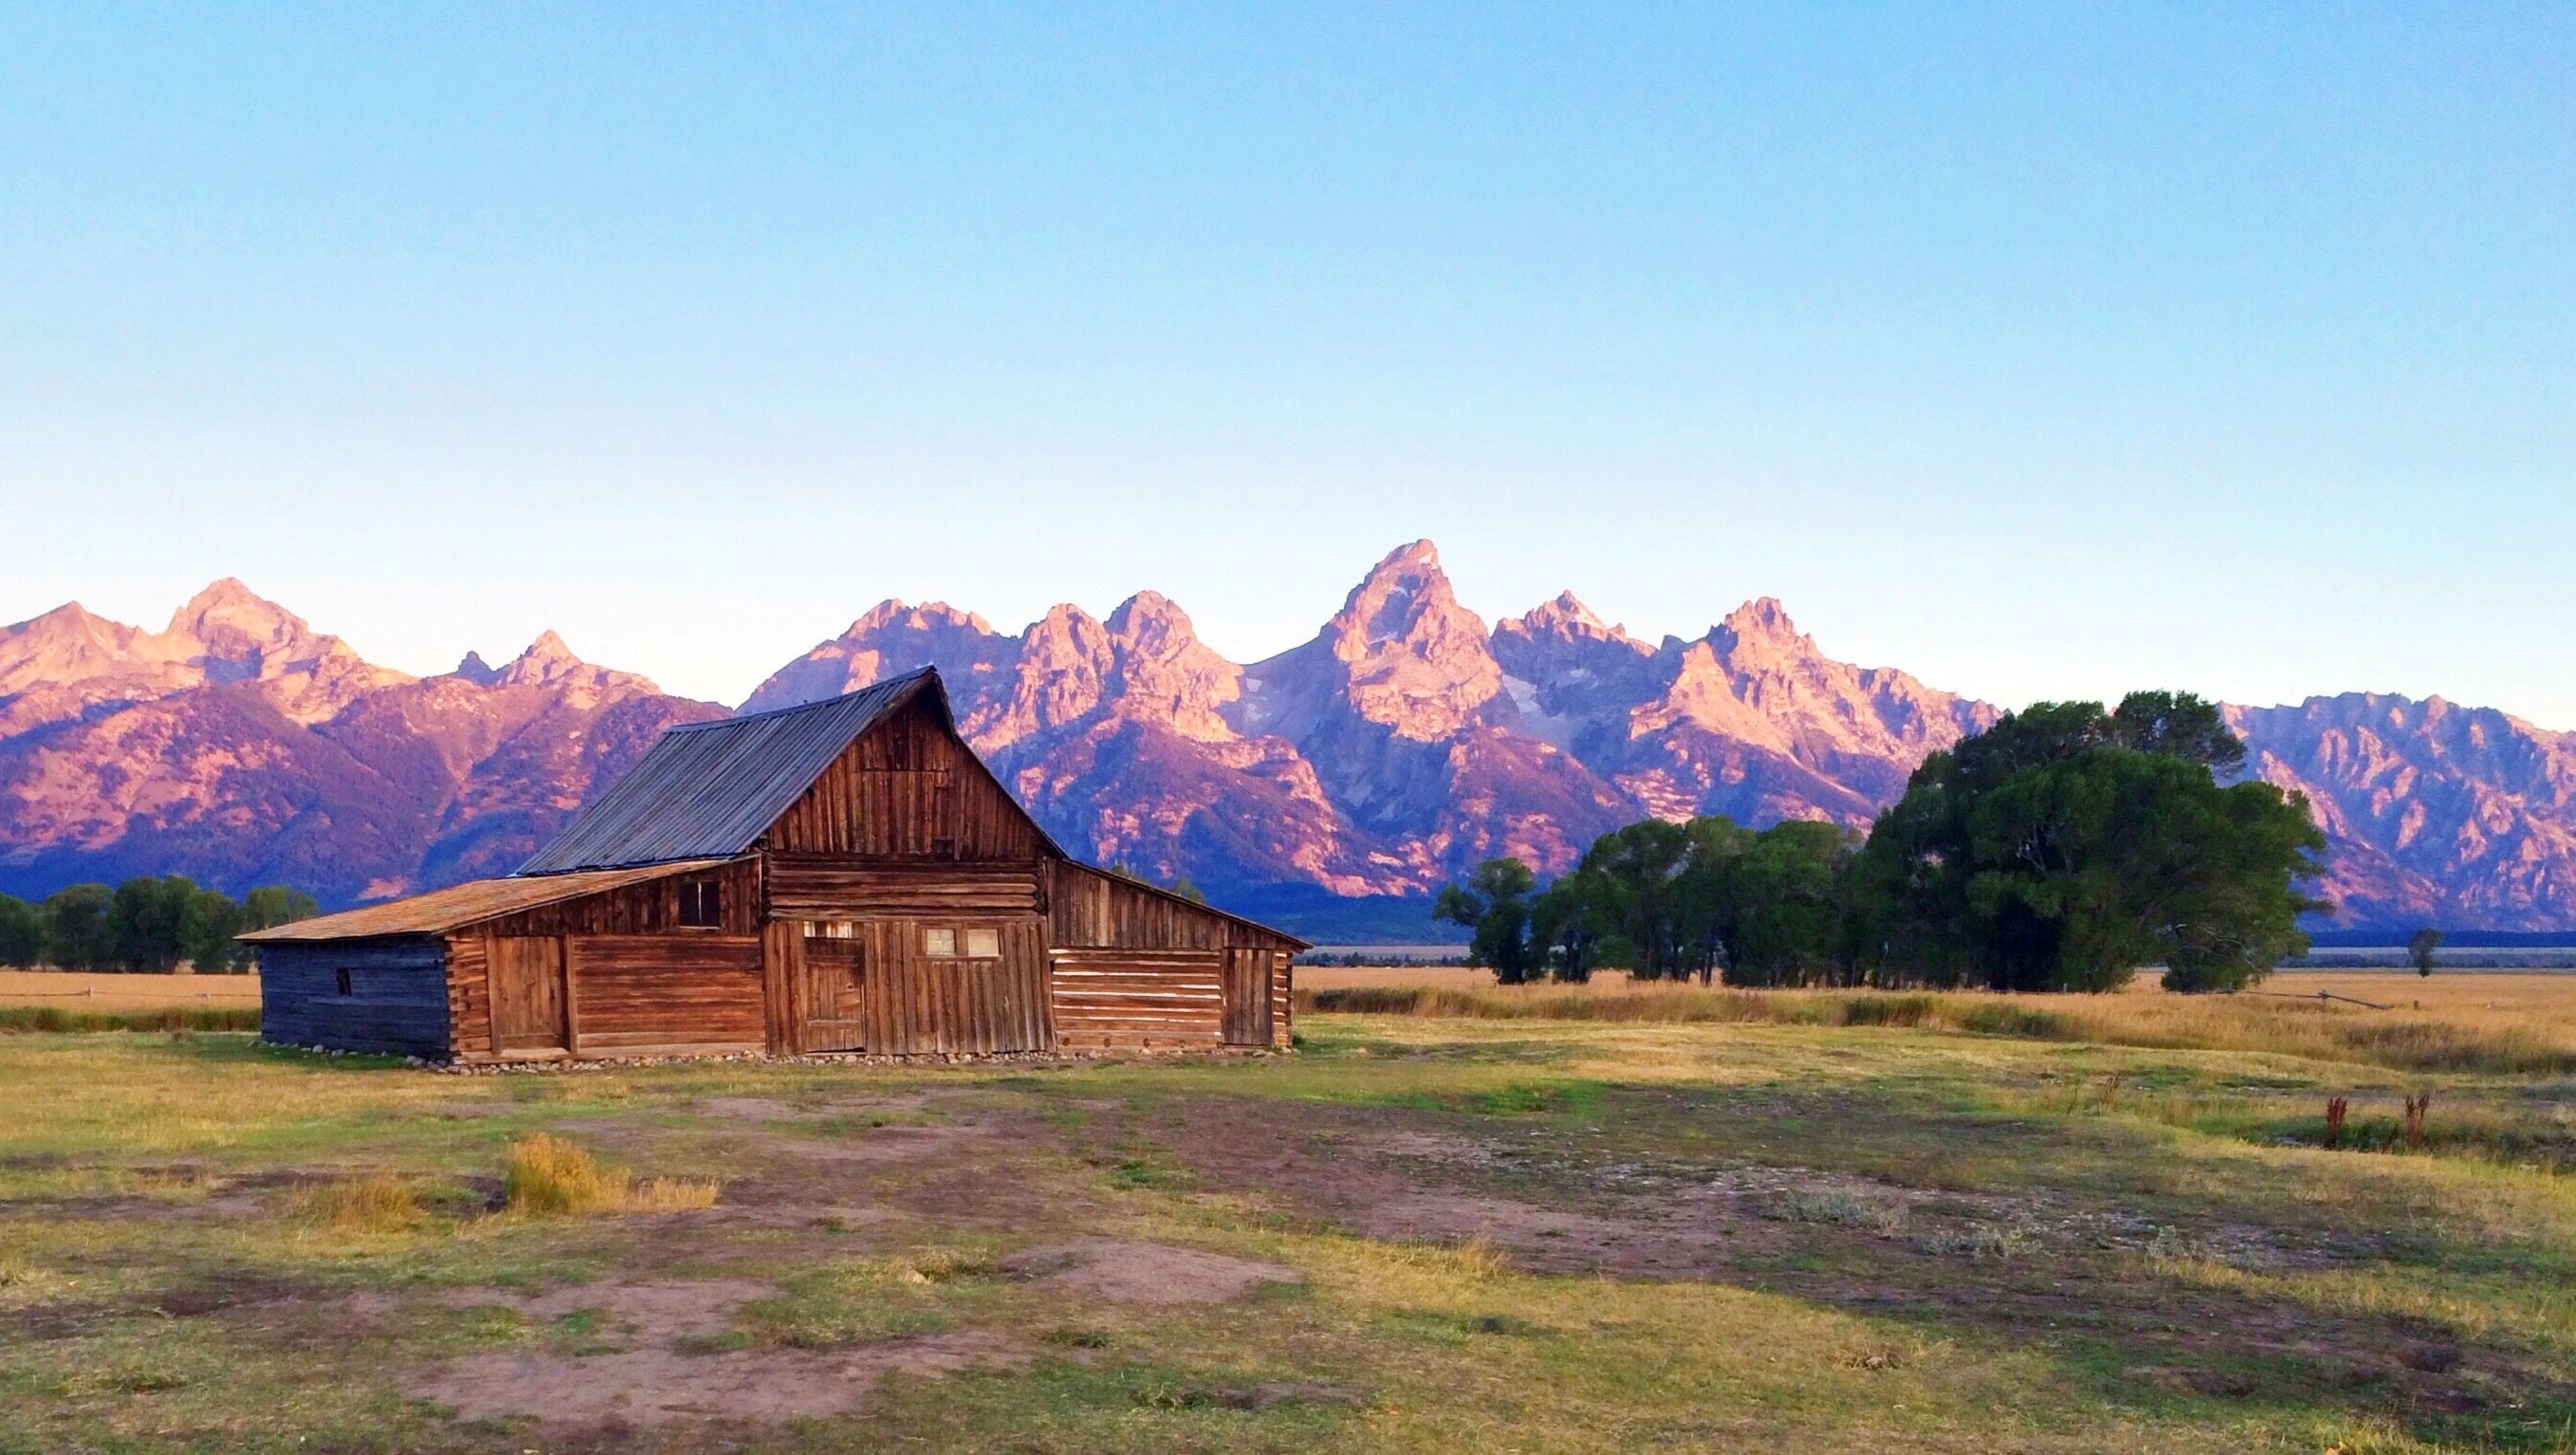 Beautiful farm house on a ranch with mountains in the background.